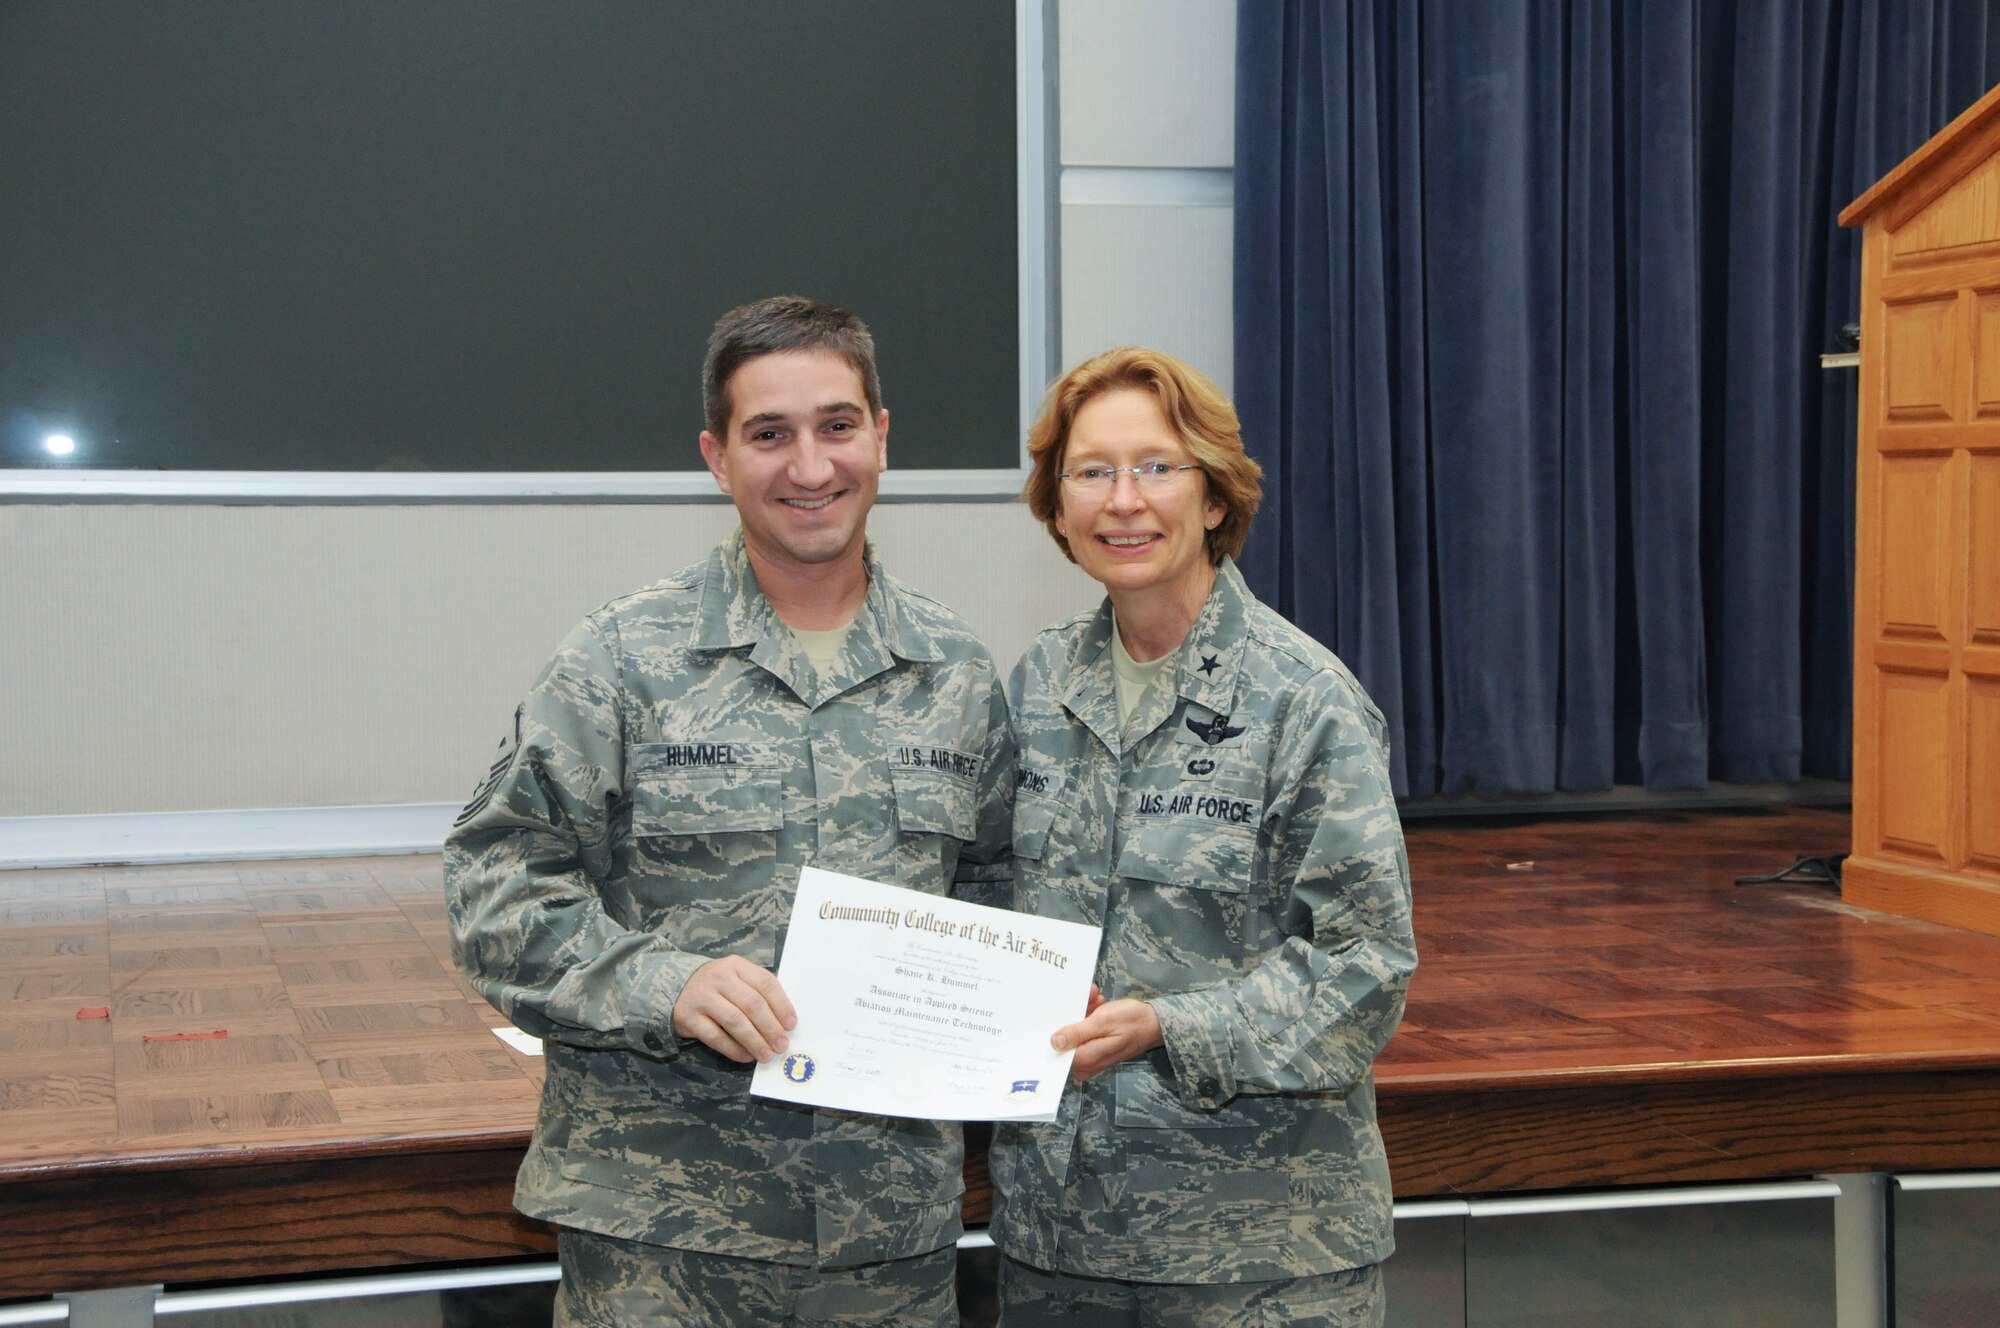 U.S. Air Force Master Sgt. Shane Hummel, left, a member of the 166th Civil Engineer Squadron, 166th Airlift Wing, receives a certificate from Brig. Gen. Carol Timmons, assistant adjutant general for air, Delaware National Guard to recognize Hummel’s attainment of a Community College of the Air Force associate of applied science degree in aircraft maintenance technology at a CCAF Class of October 2013 graduation ceremony held Nov. 3, 2013 at the New Castle Air National Guard Base, Del. (U.S. Air National Guard photo by Tech. Sgt. Robin Meredith)